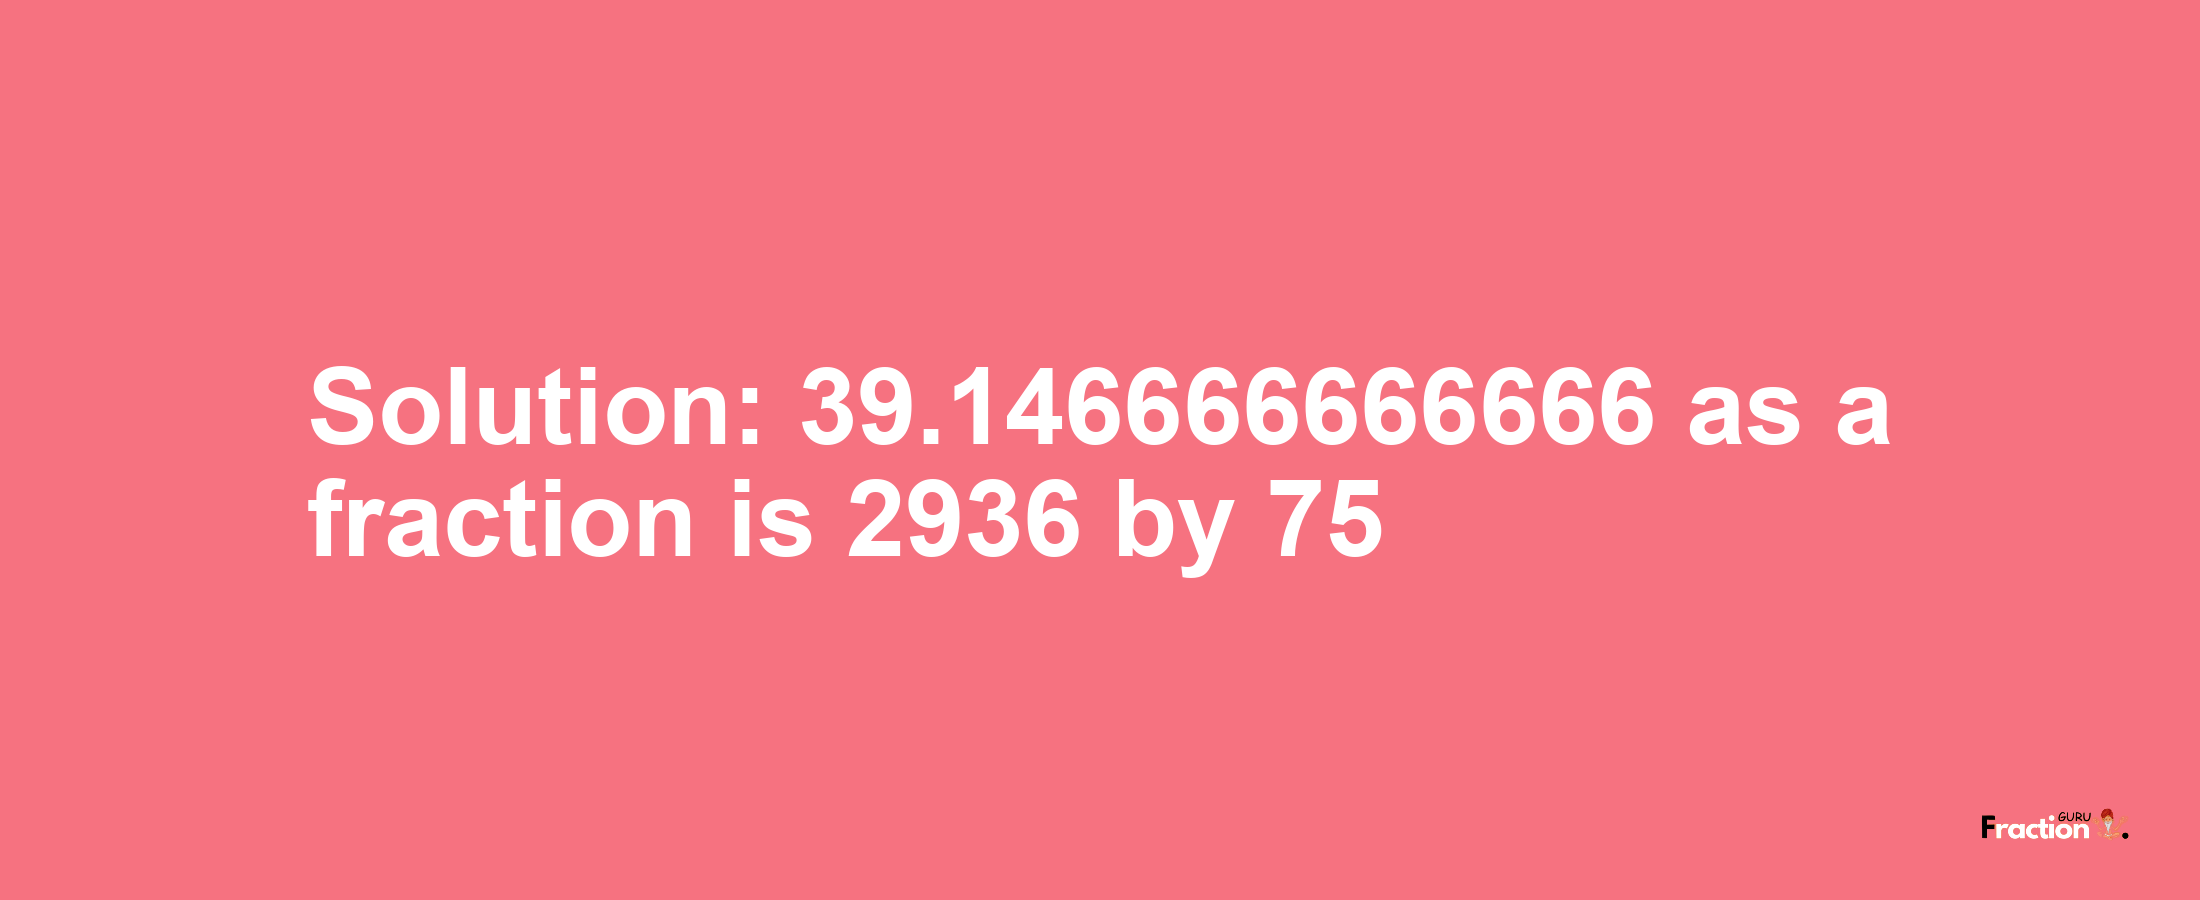 Solution:39.146666666666 as a fraction is 2936/75